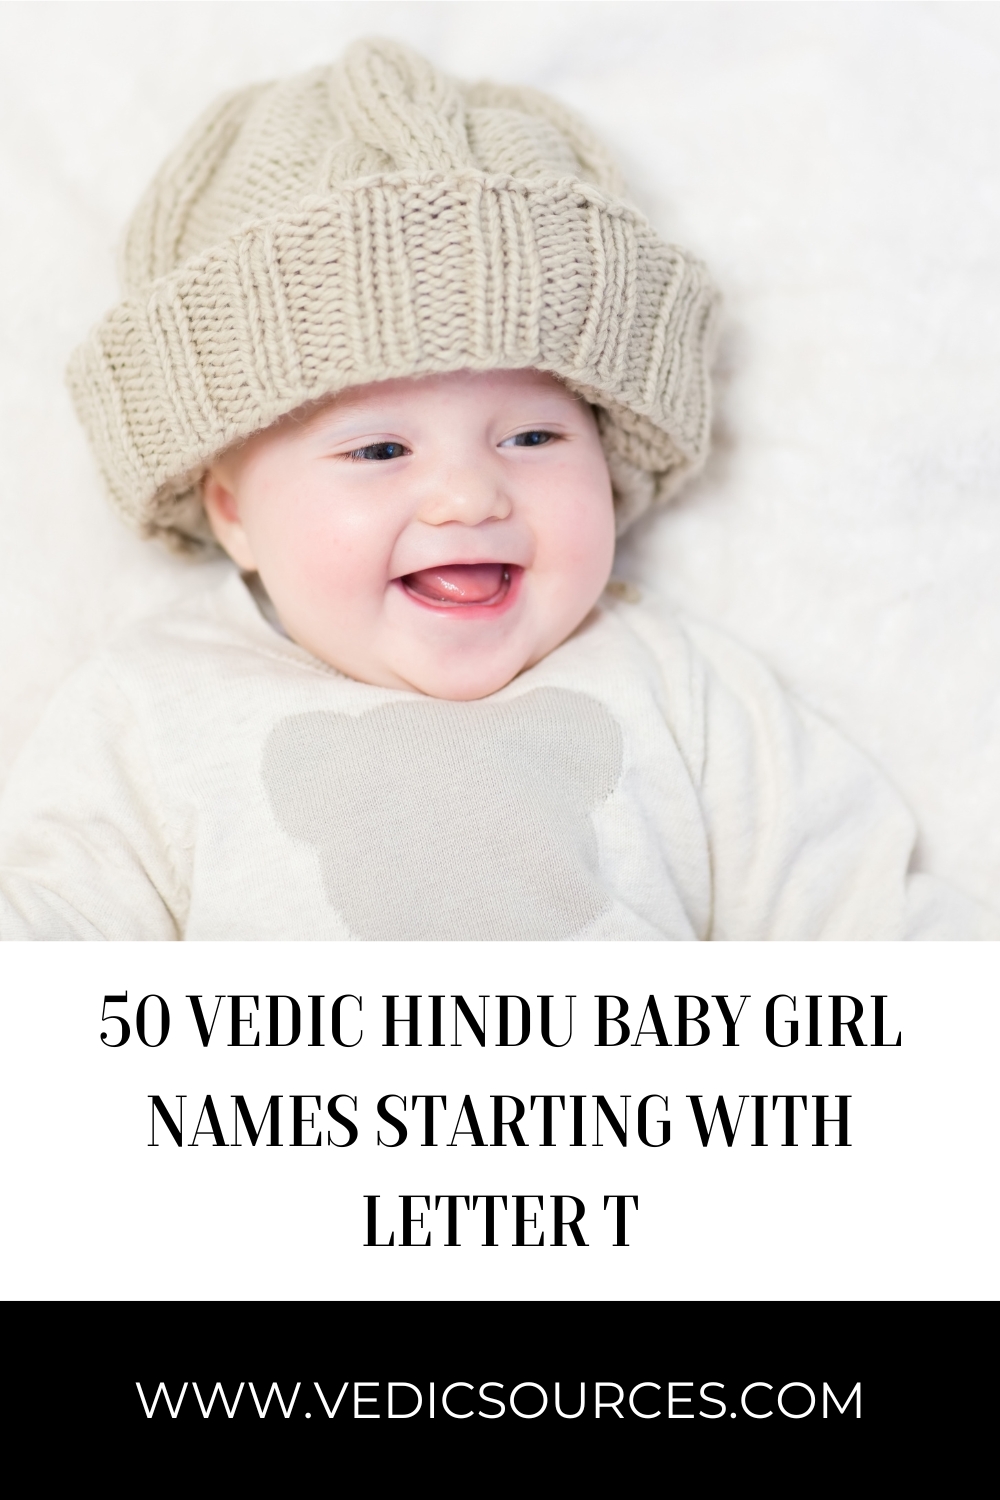 50 Vedic Hindu Baby Girl Names Starting with Letter T